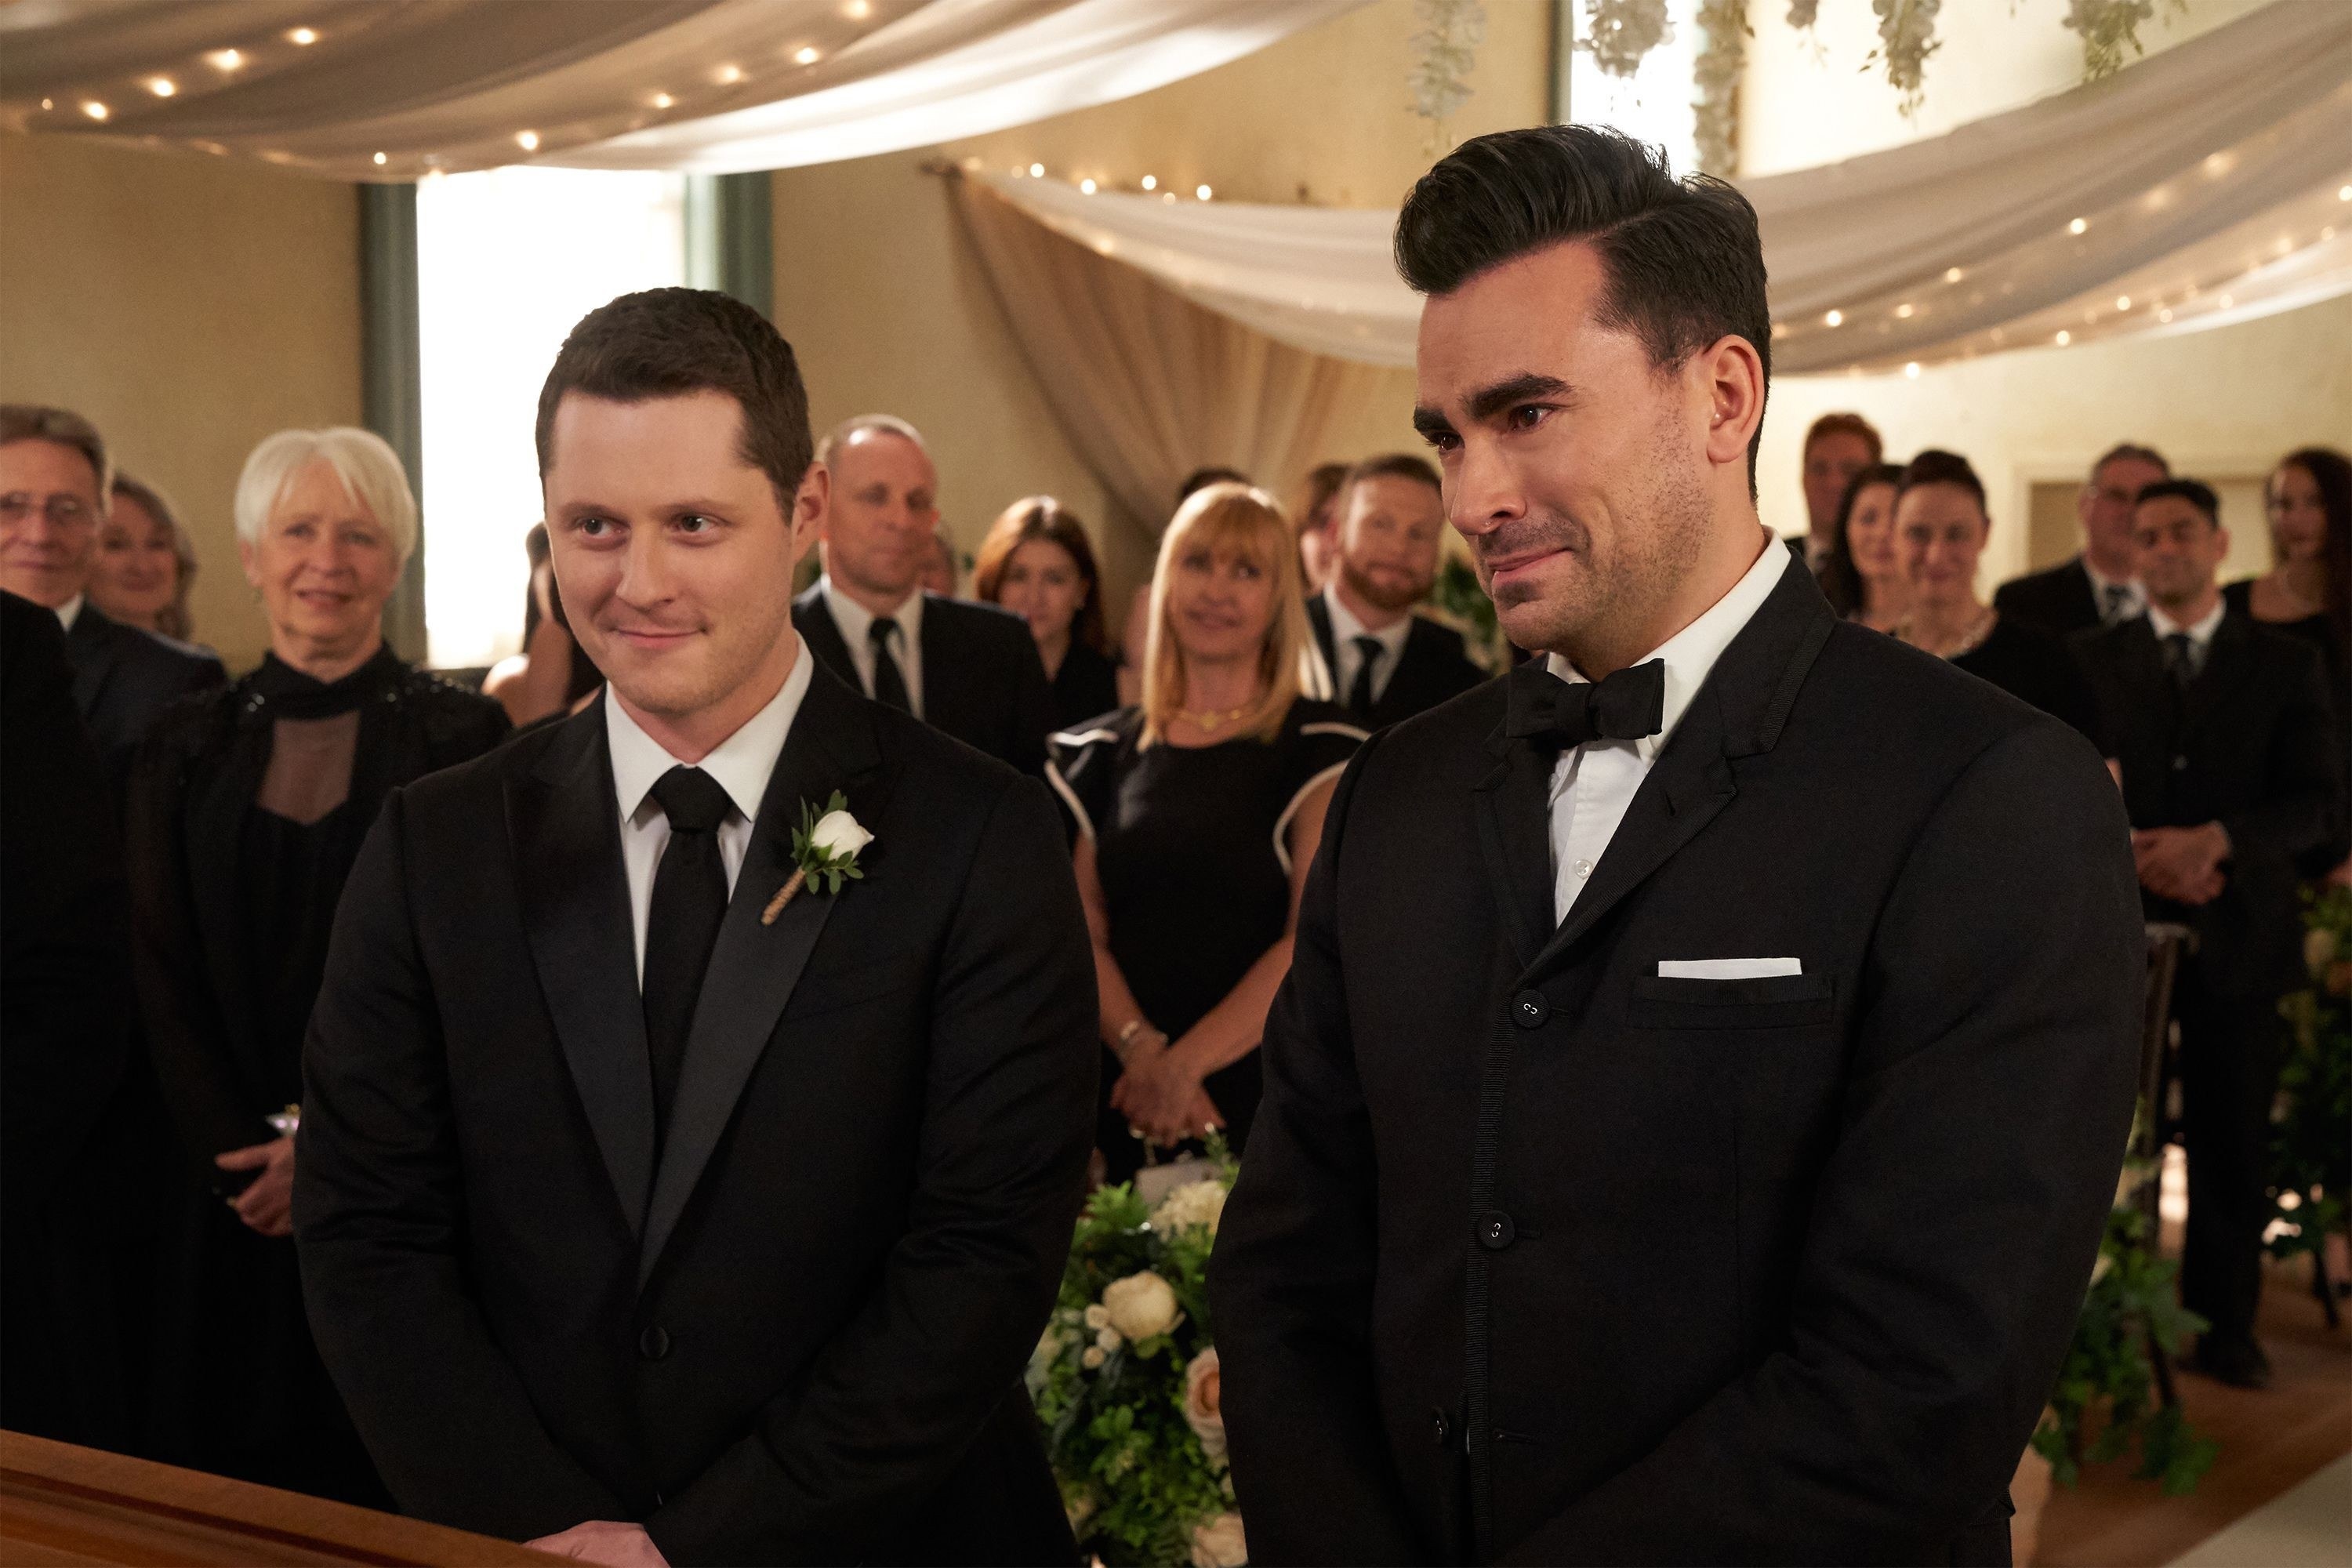 Patrick and David at the altar for their wedding